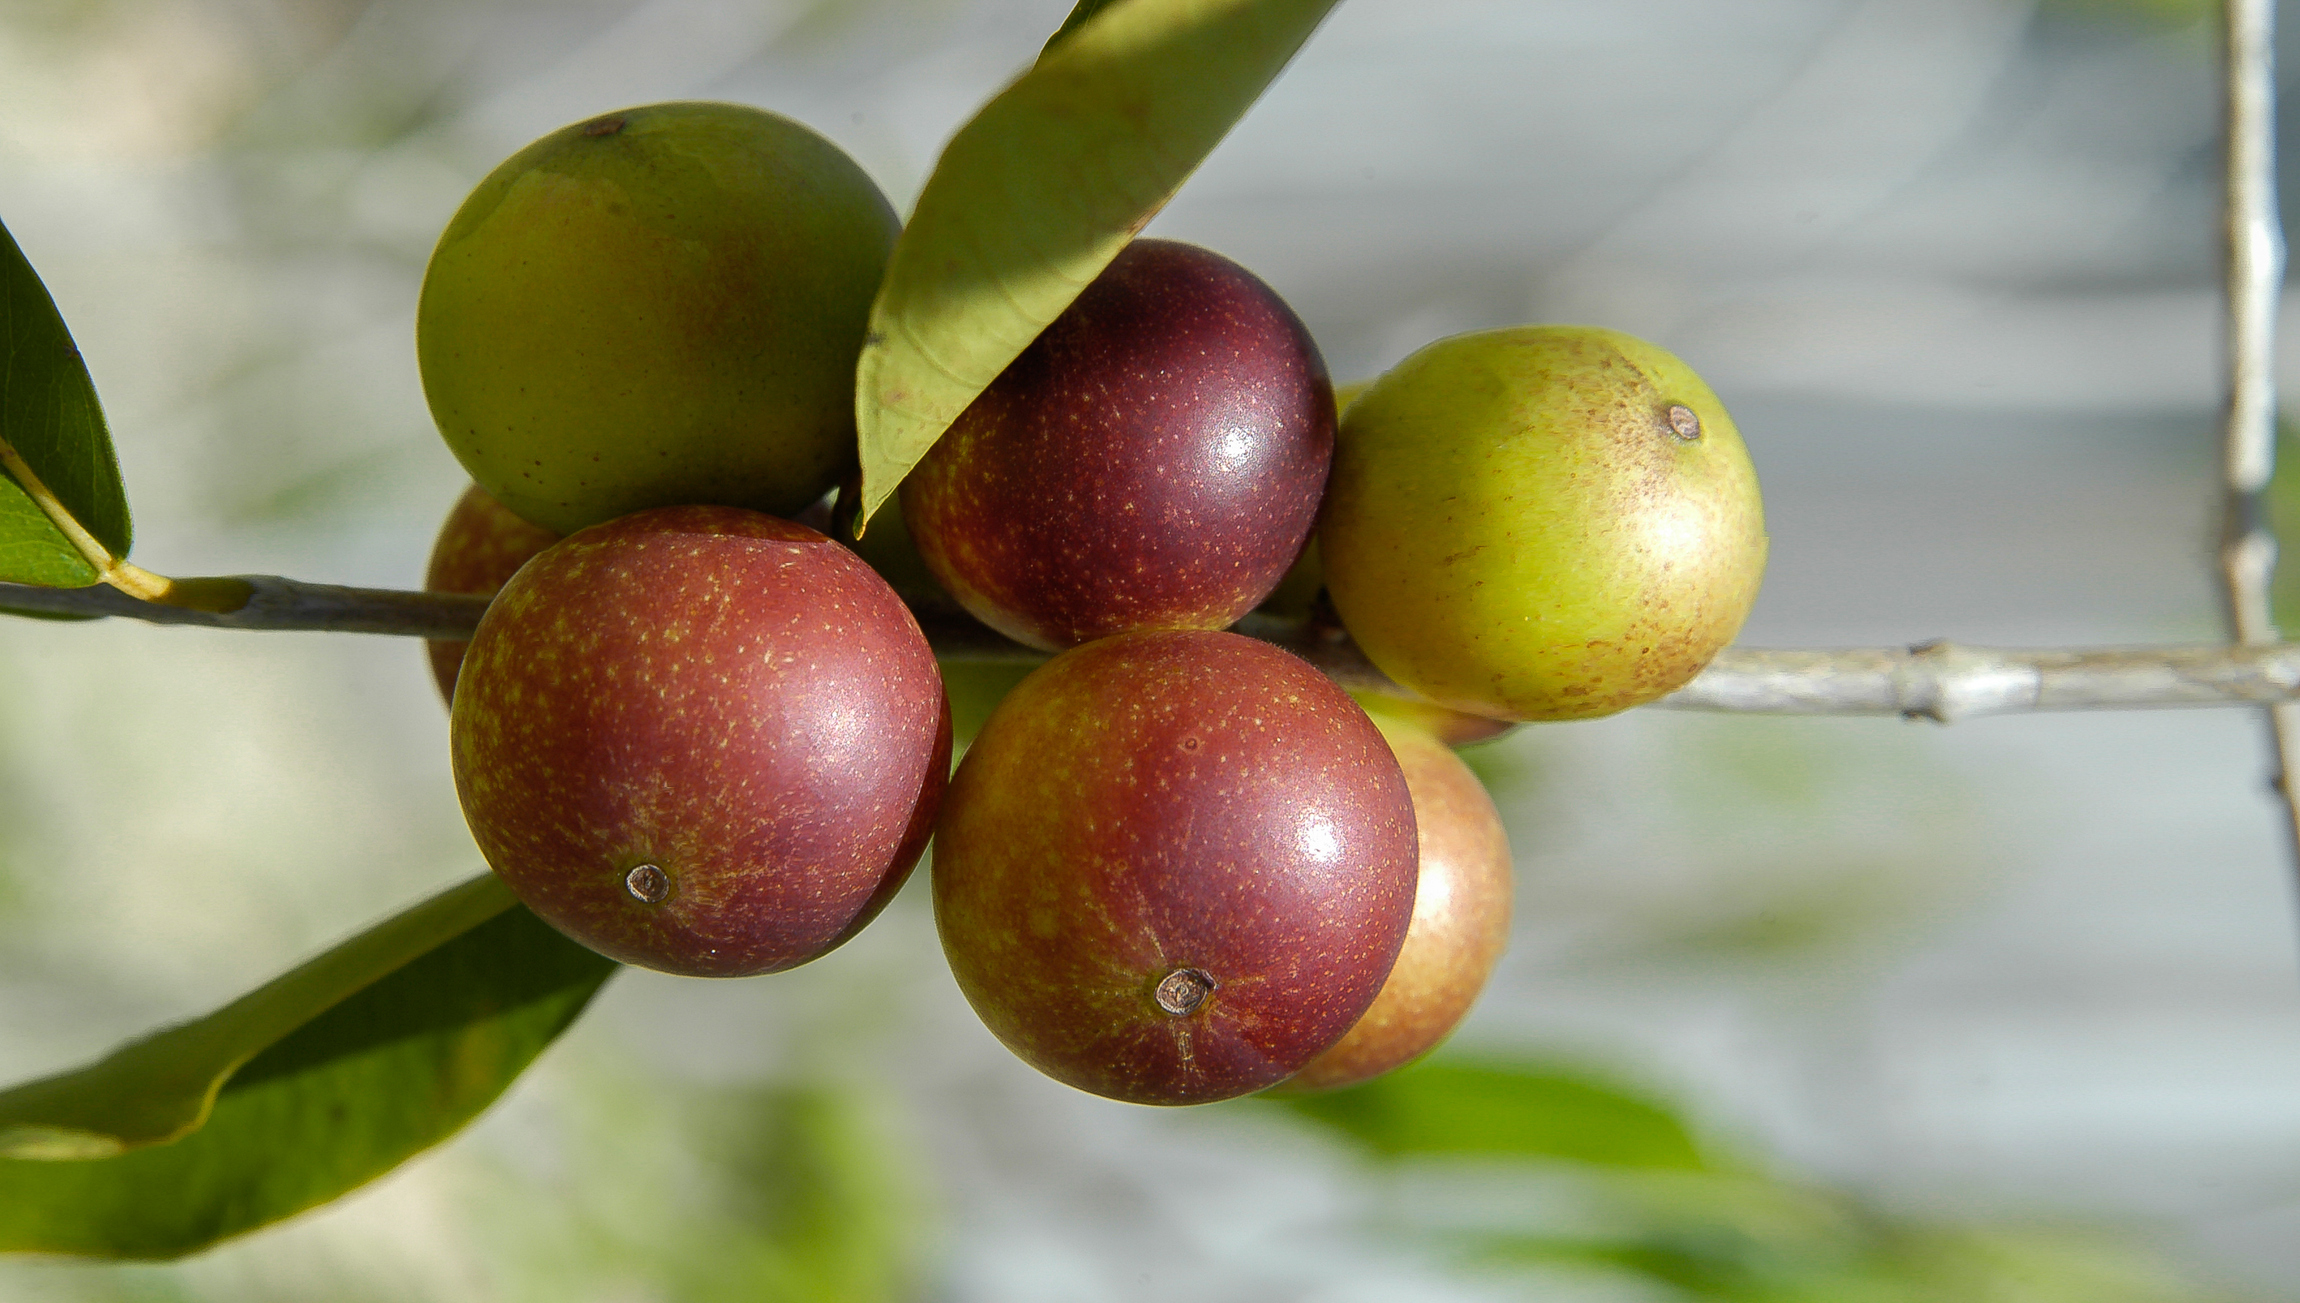 The Amazonian fruit offering hope against cancer